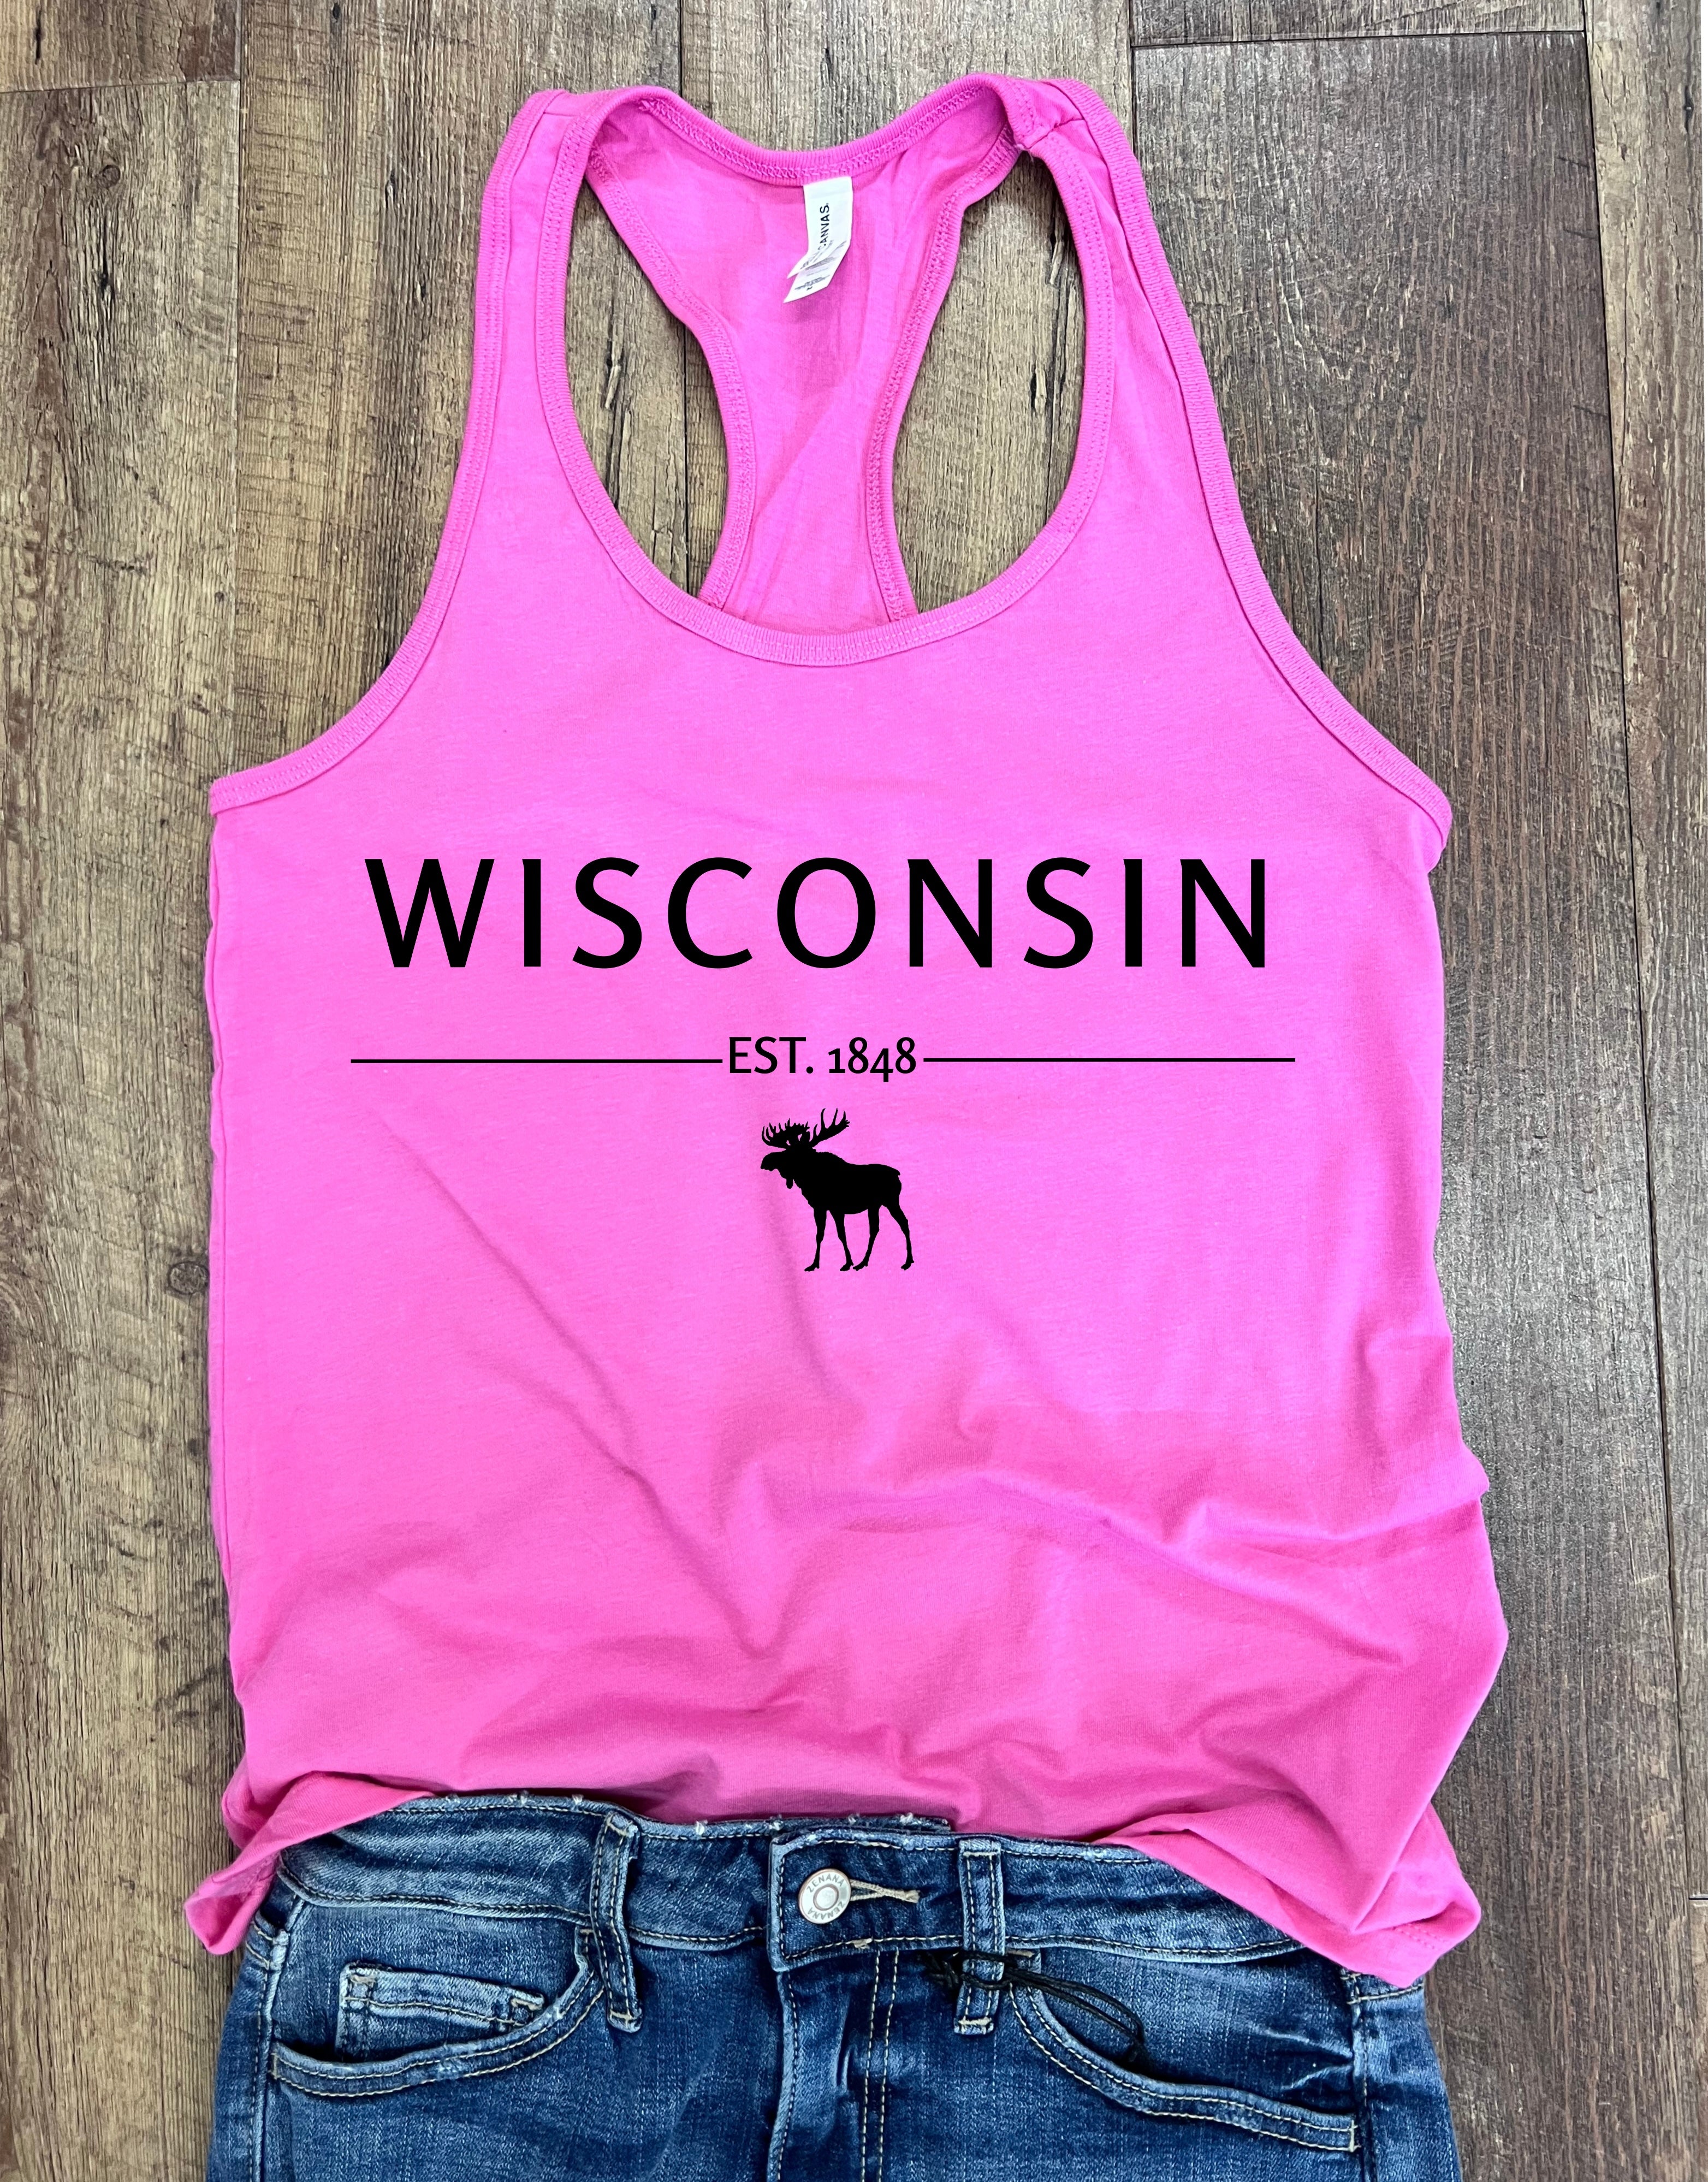 Wisconsin 1848 Tank in Pink